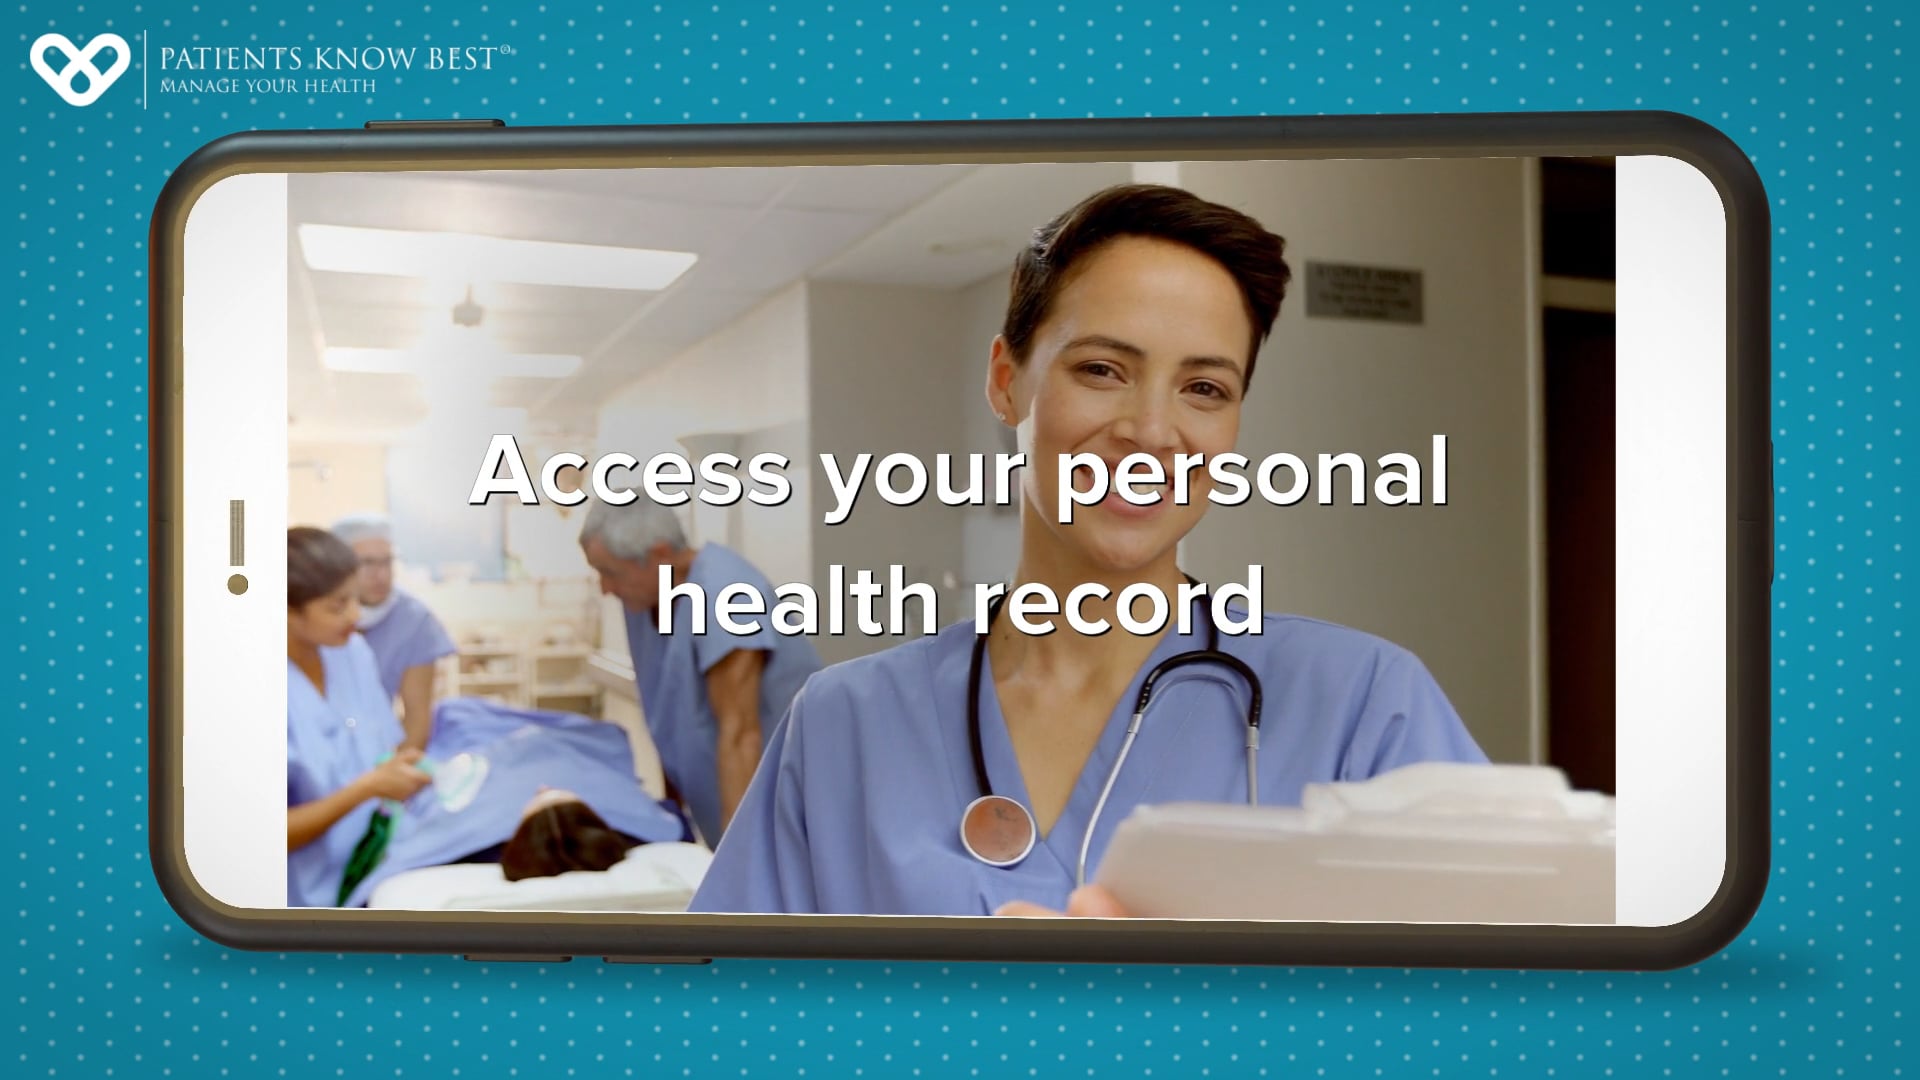 Patients Know Best - Access your personal health record - BD